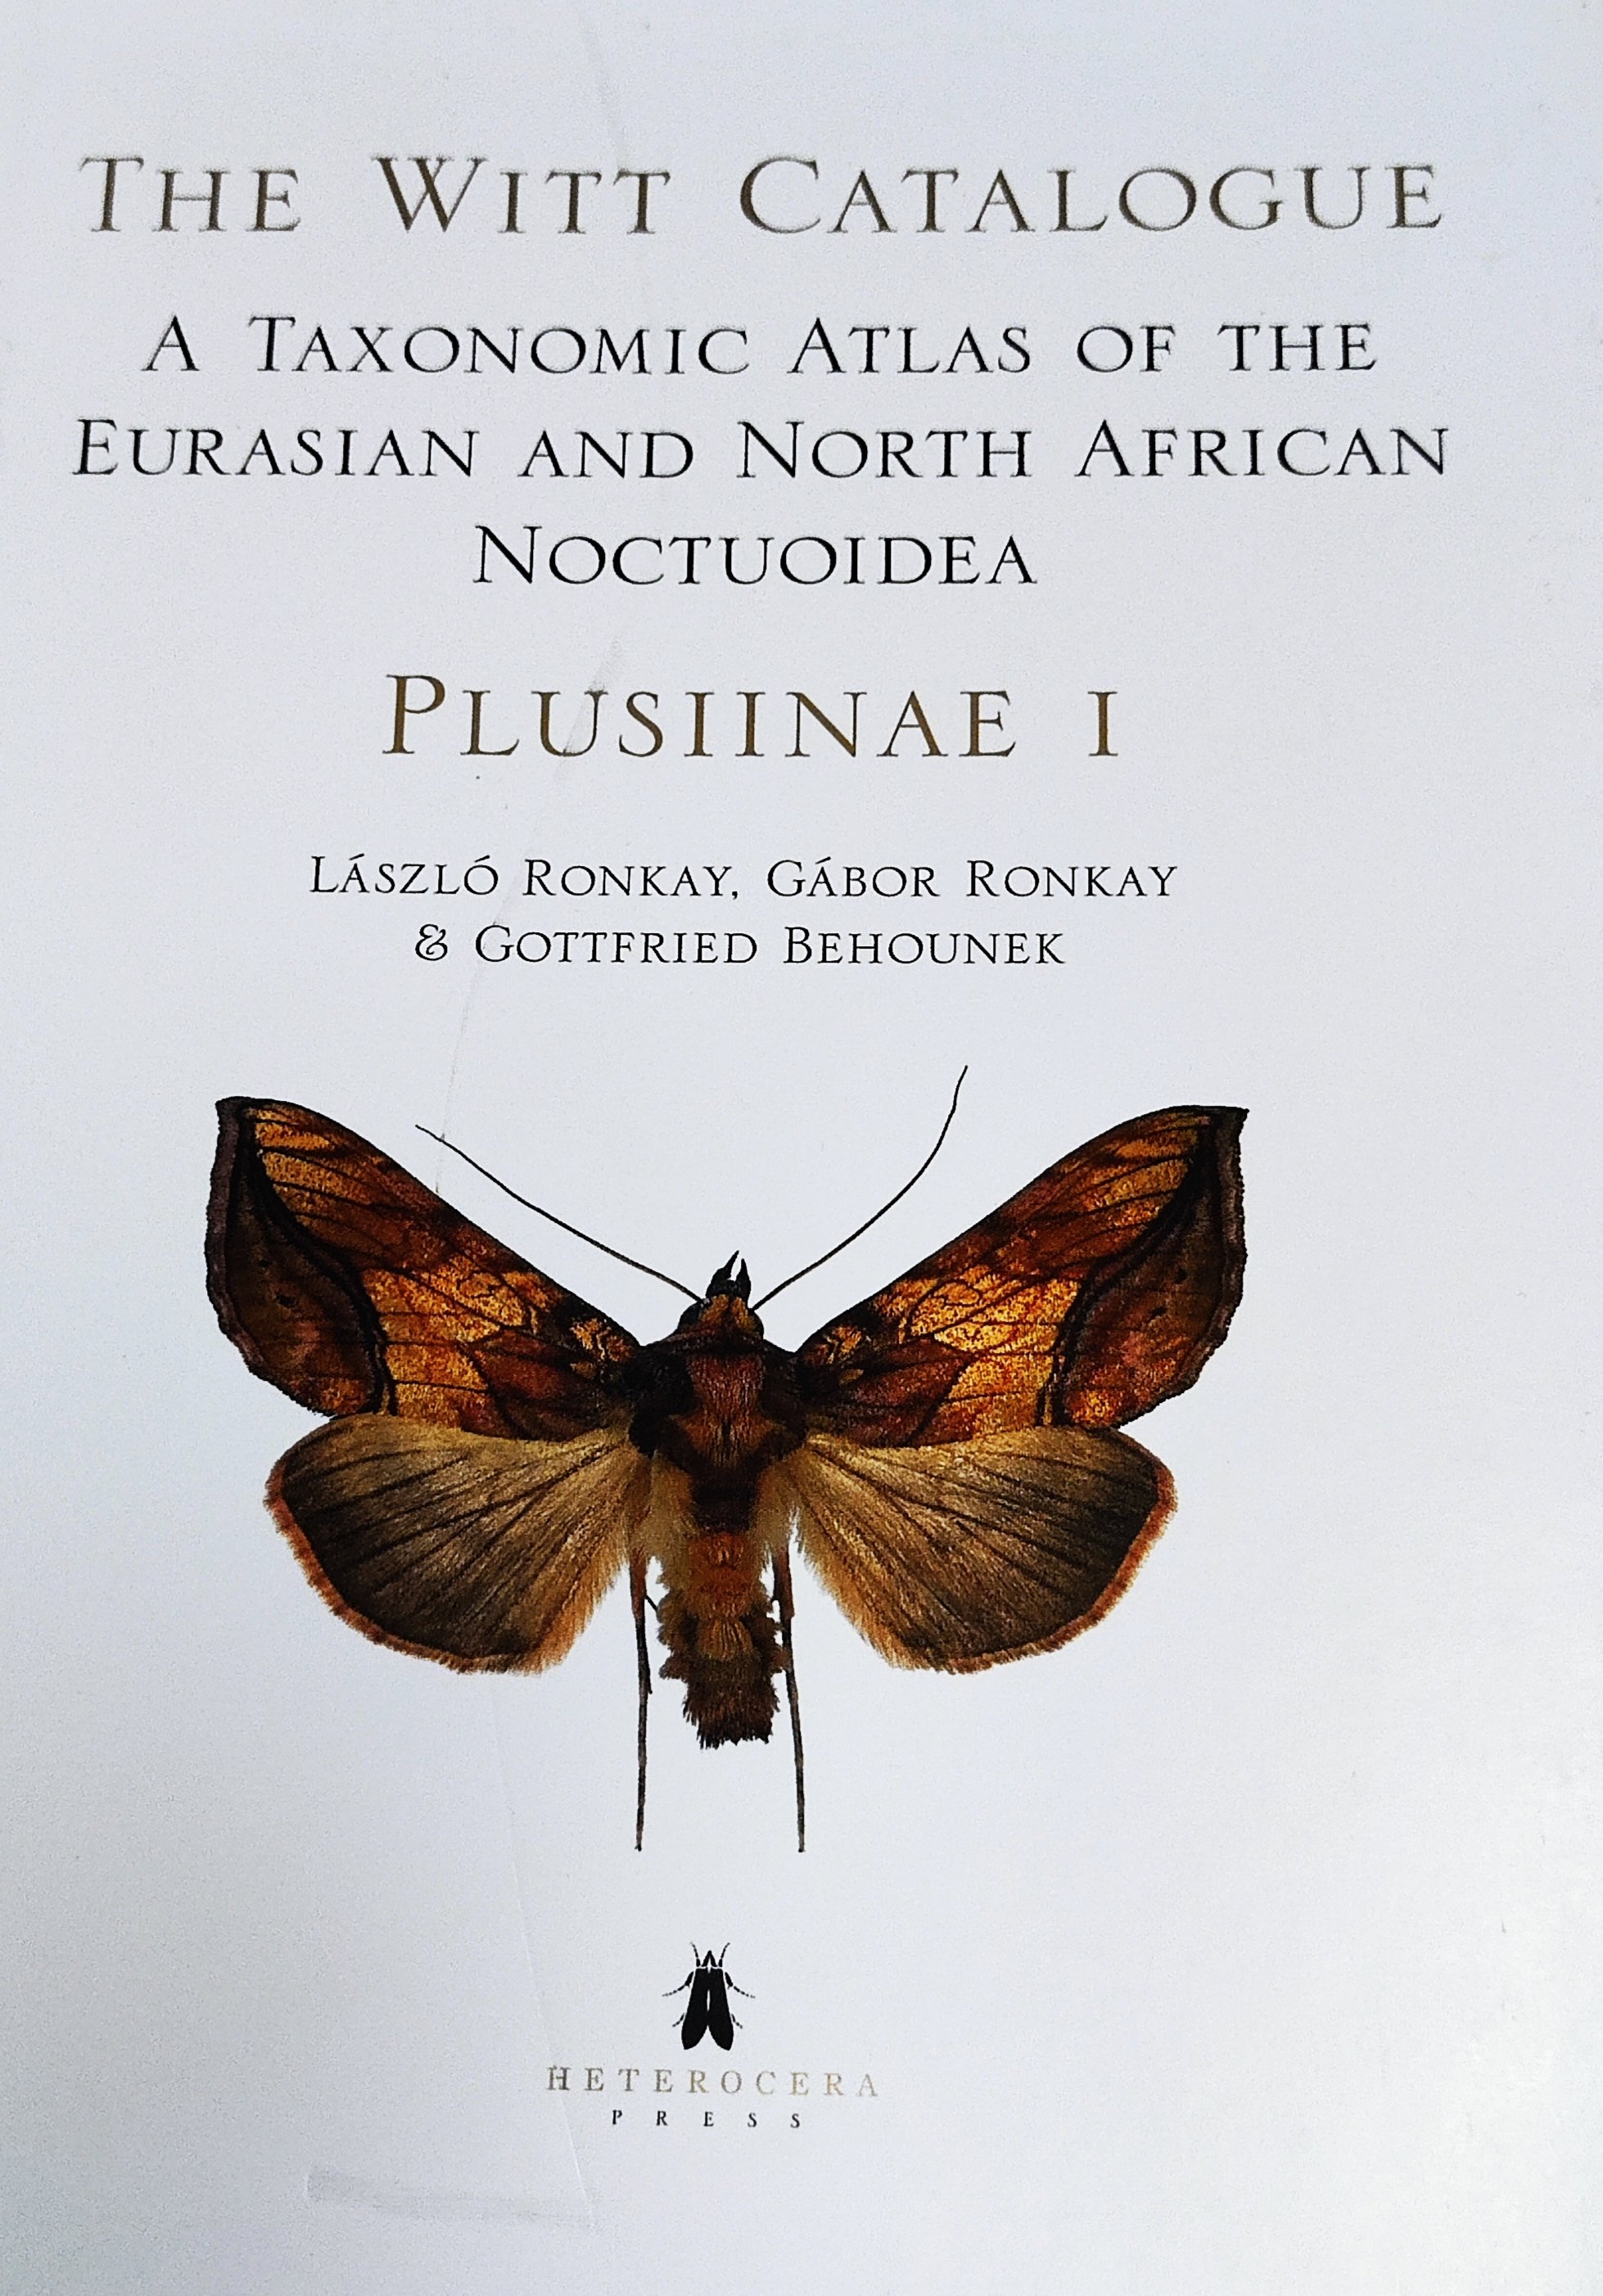 The Witt Catalogue: A Taxonomic Atlas of the Eurasian and North African Noctuoidea. volume 1, Plusiinae 1. (Rippl-Rónai Múzeum CC BY-NC-ND)